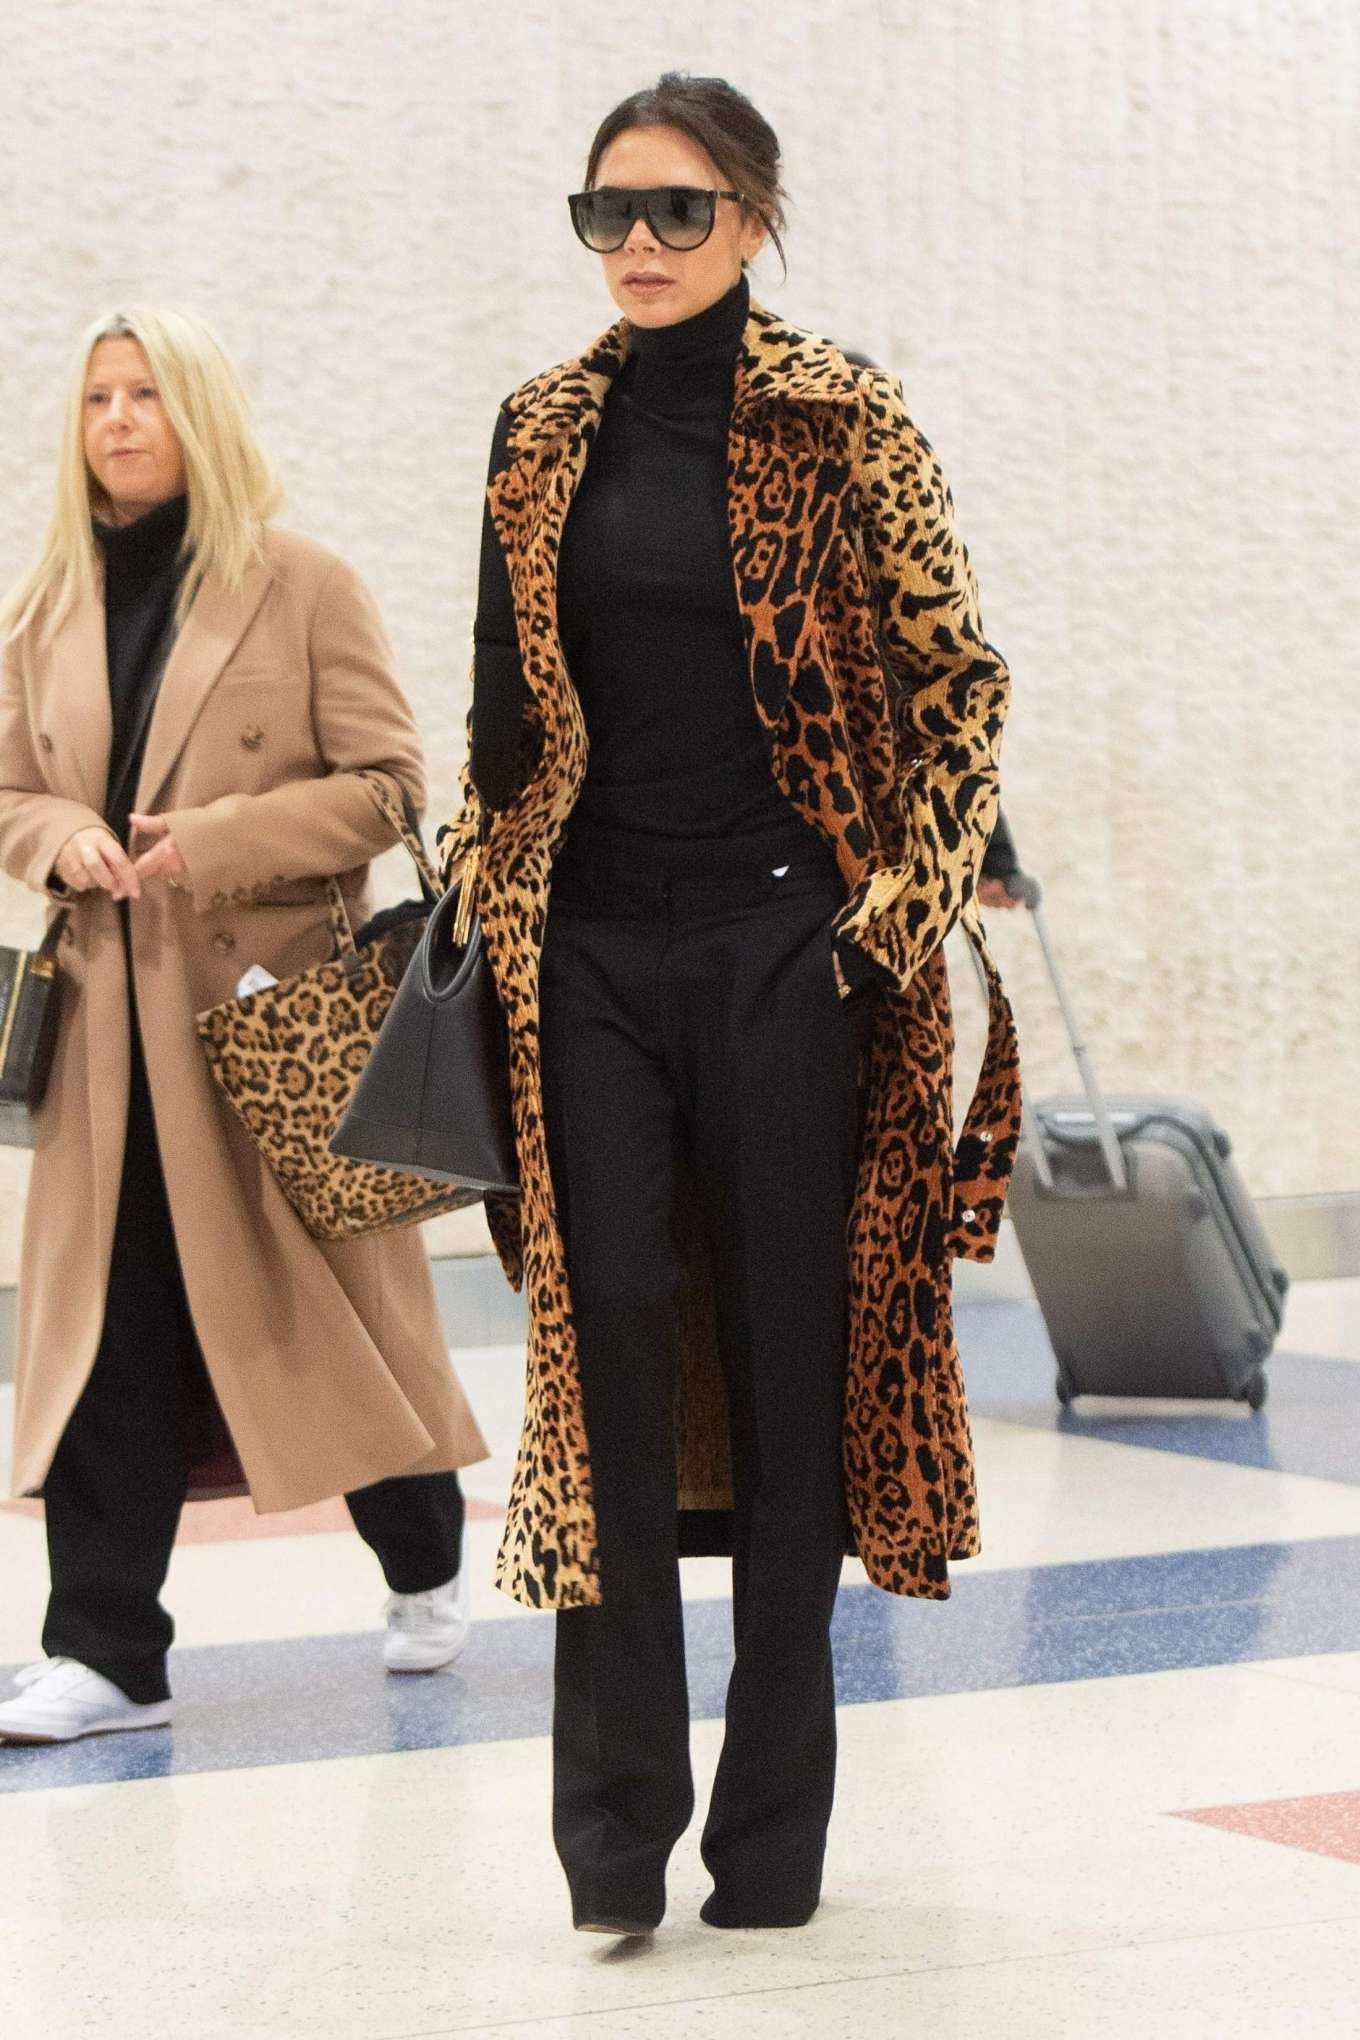 Victoria Beckham â€“ Seen While arrive at JFK Airport in New York